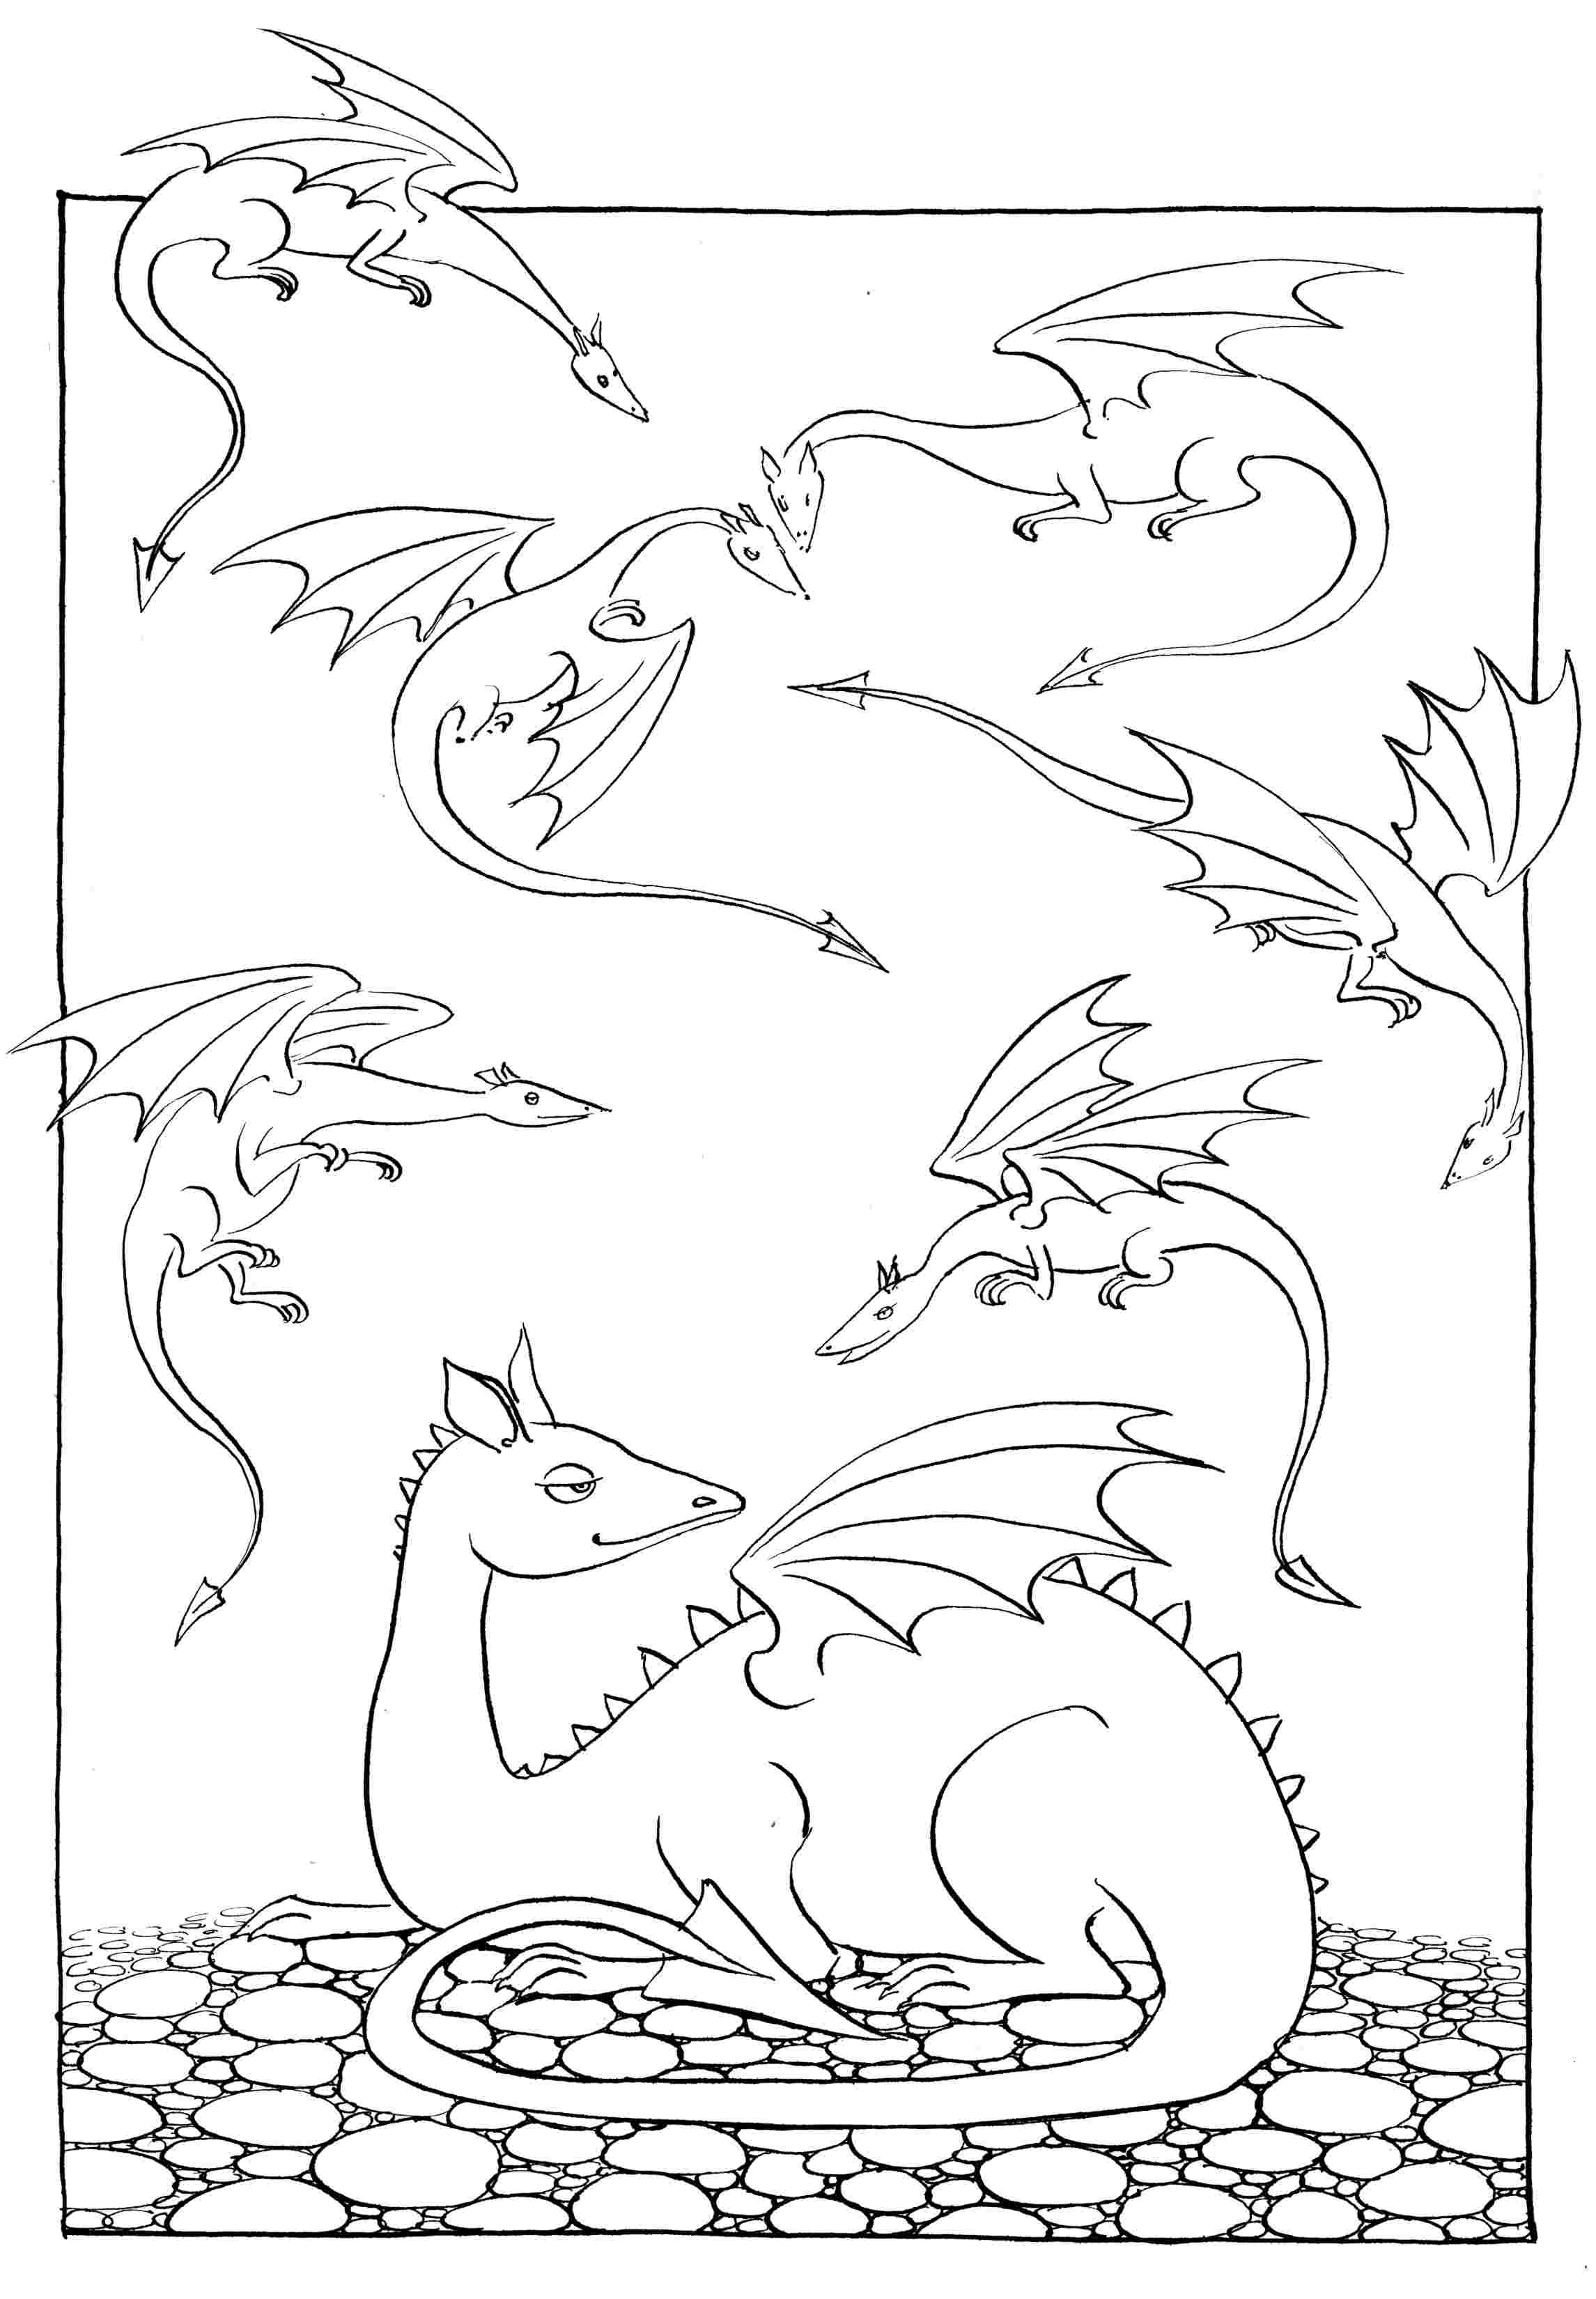 Dragon Babies - colouring-in drawing - to download, right click and save, print out and colour in!